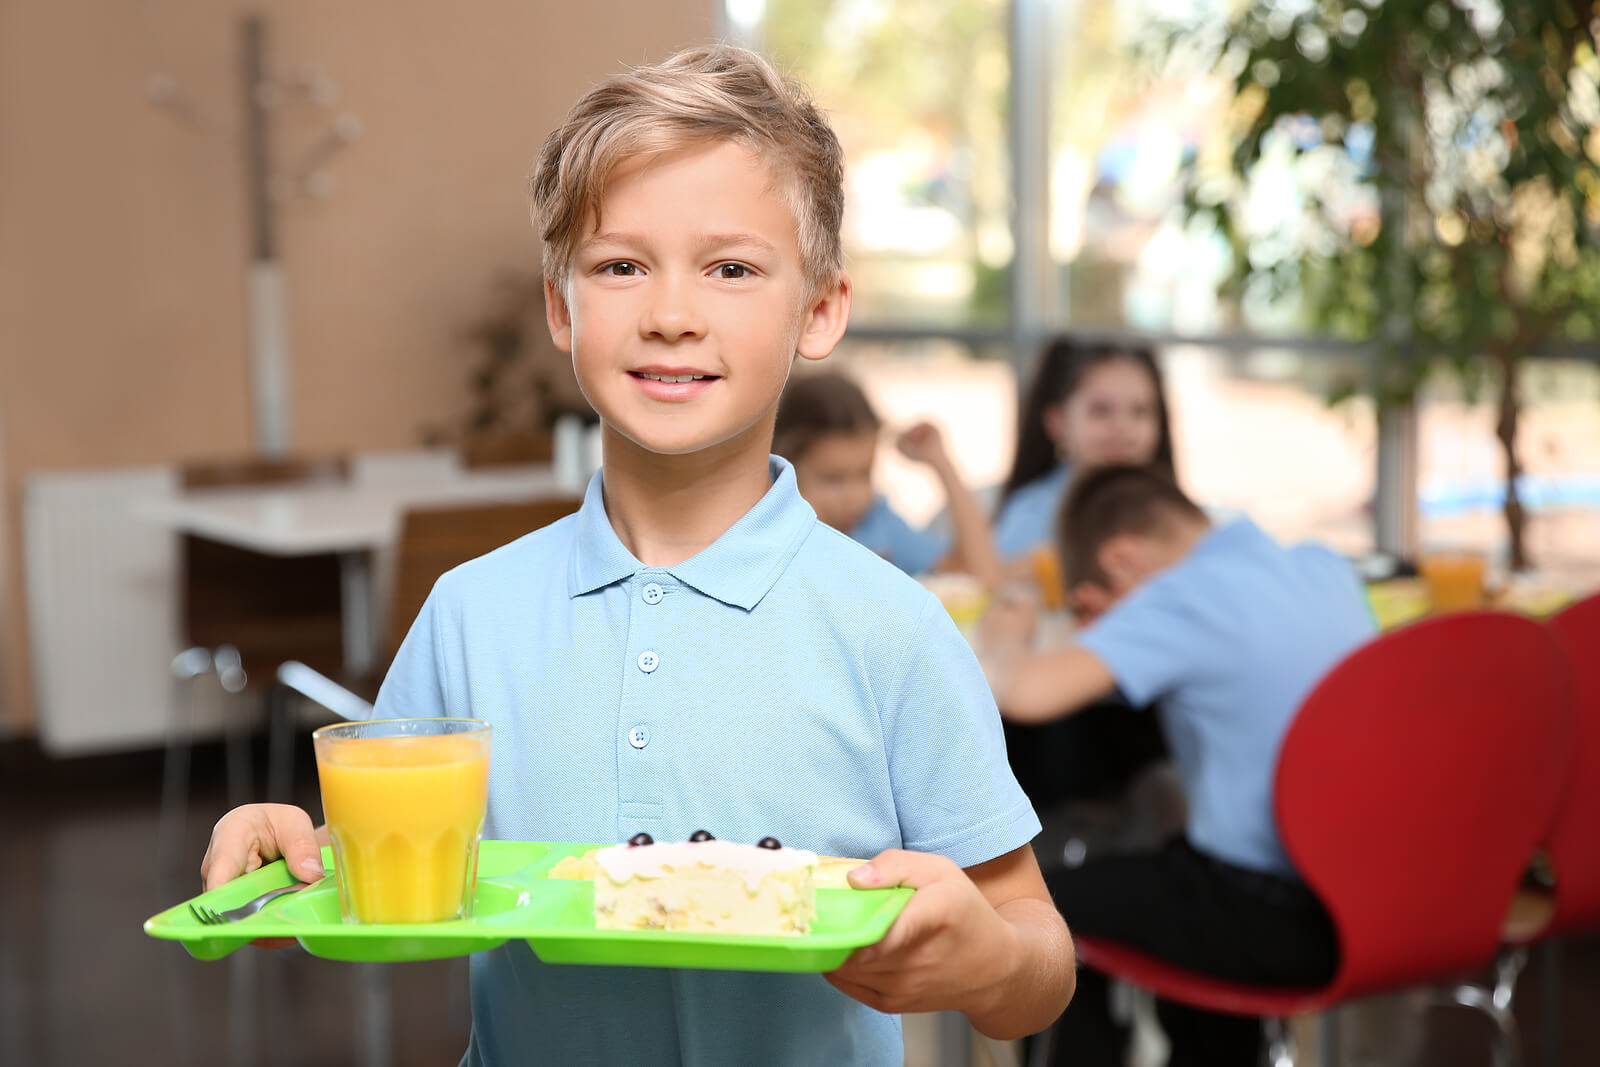 A schoolboy holding a lunch tray that has cake and orange juice on it.